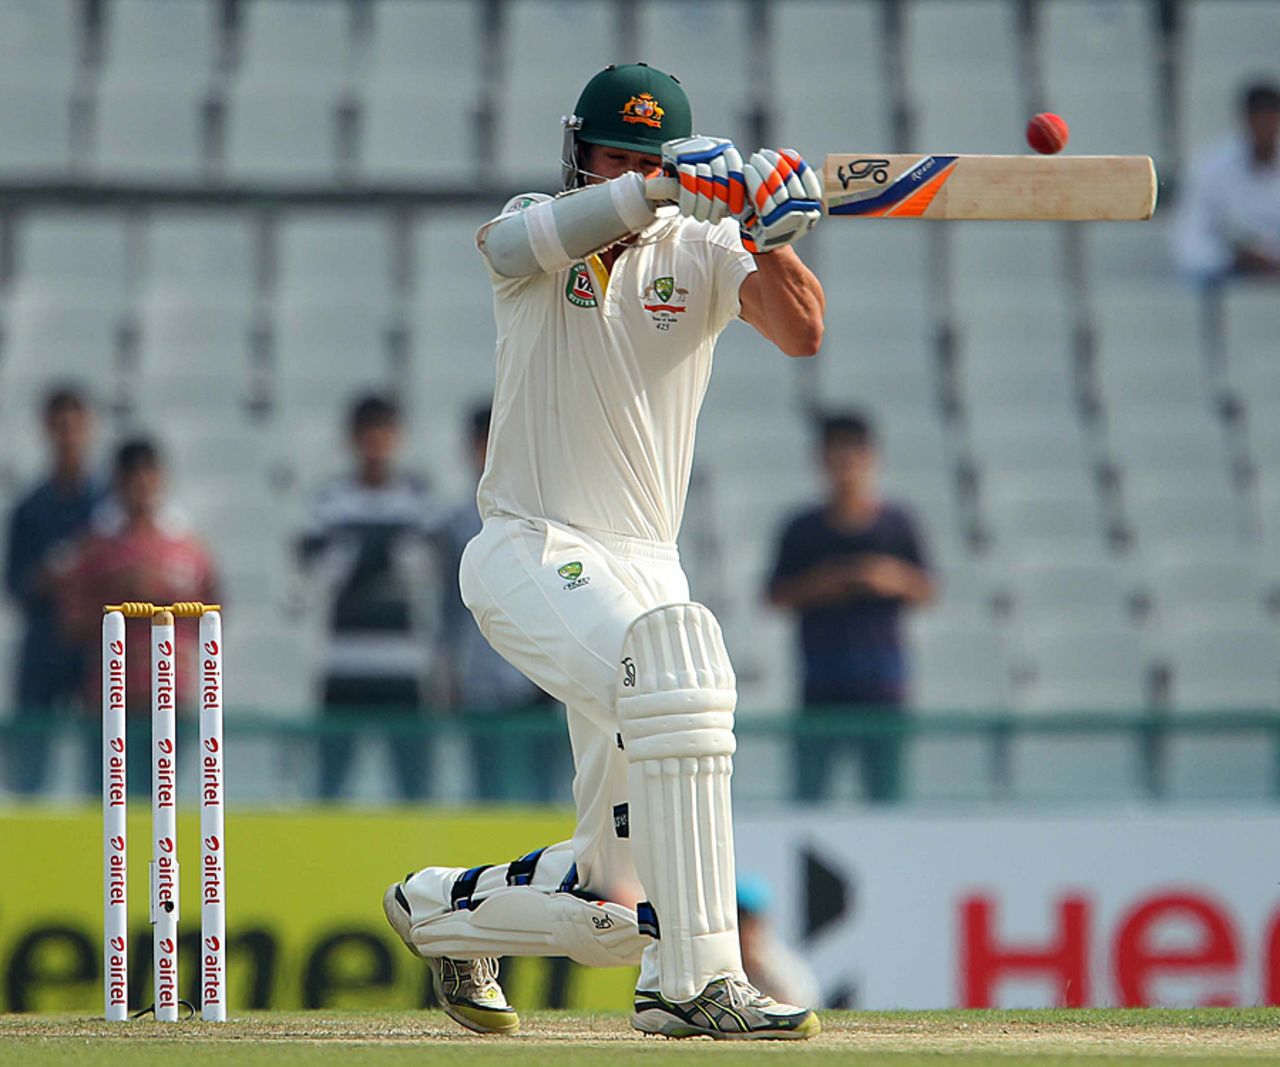 Mitchell Starc hooks a short delivery, India v Australia, 3rd Test, Mohali, 3rd day, March 16, 2013